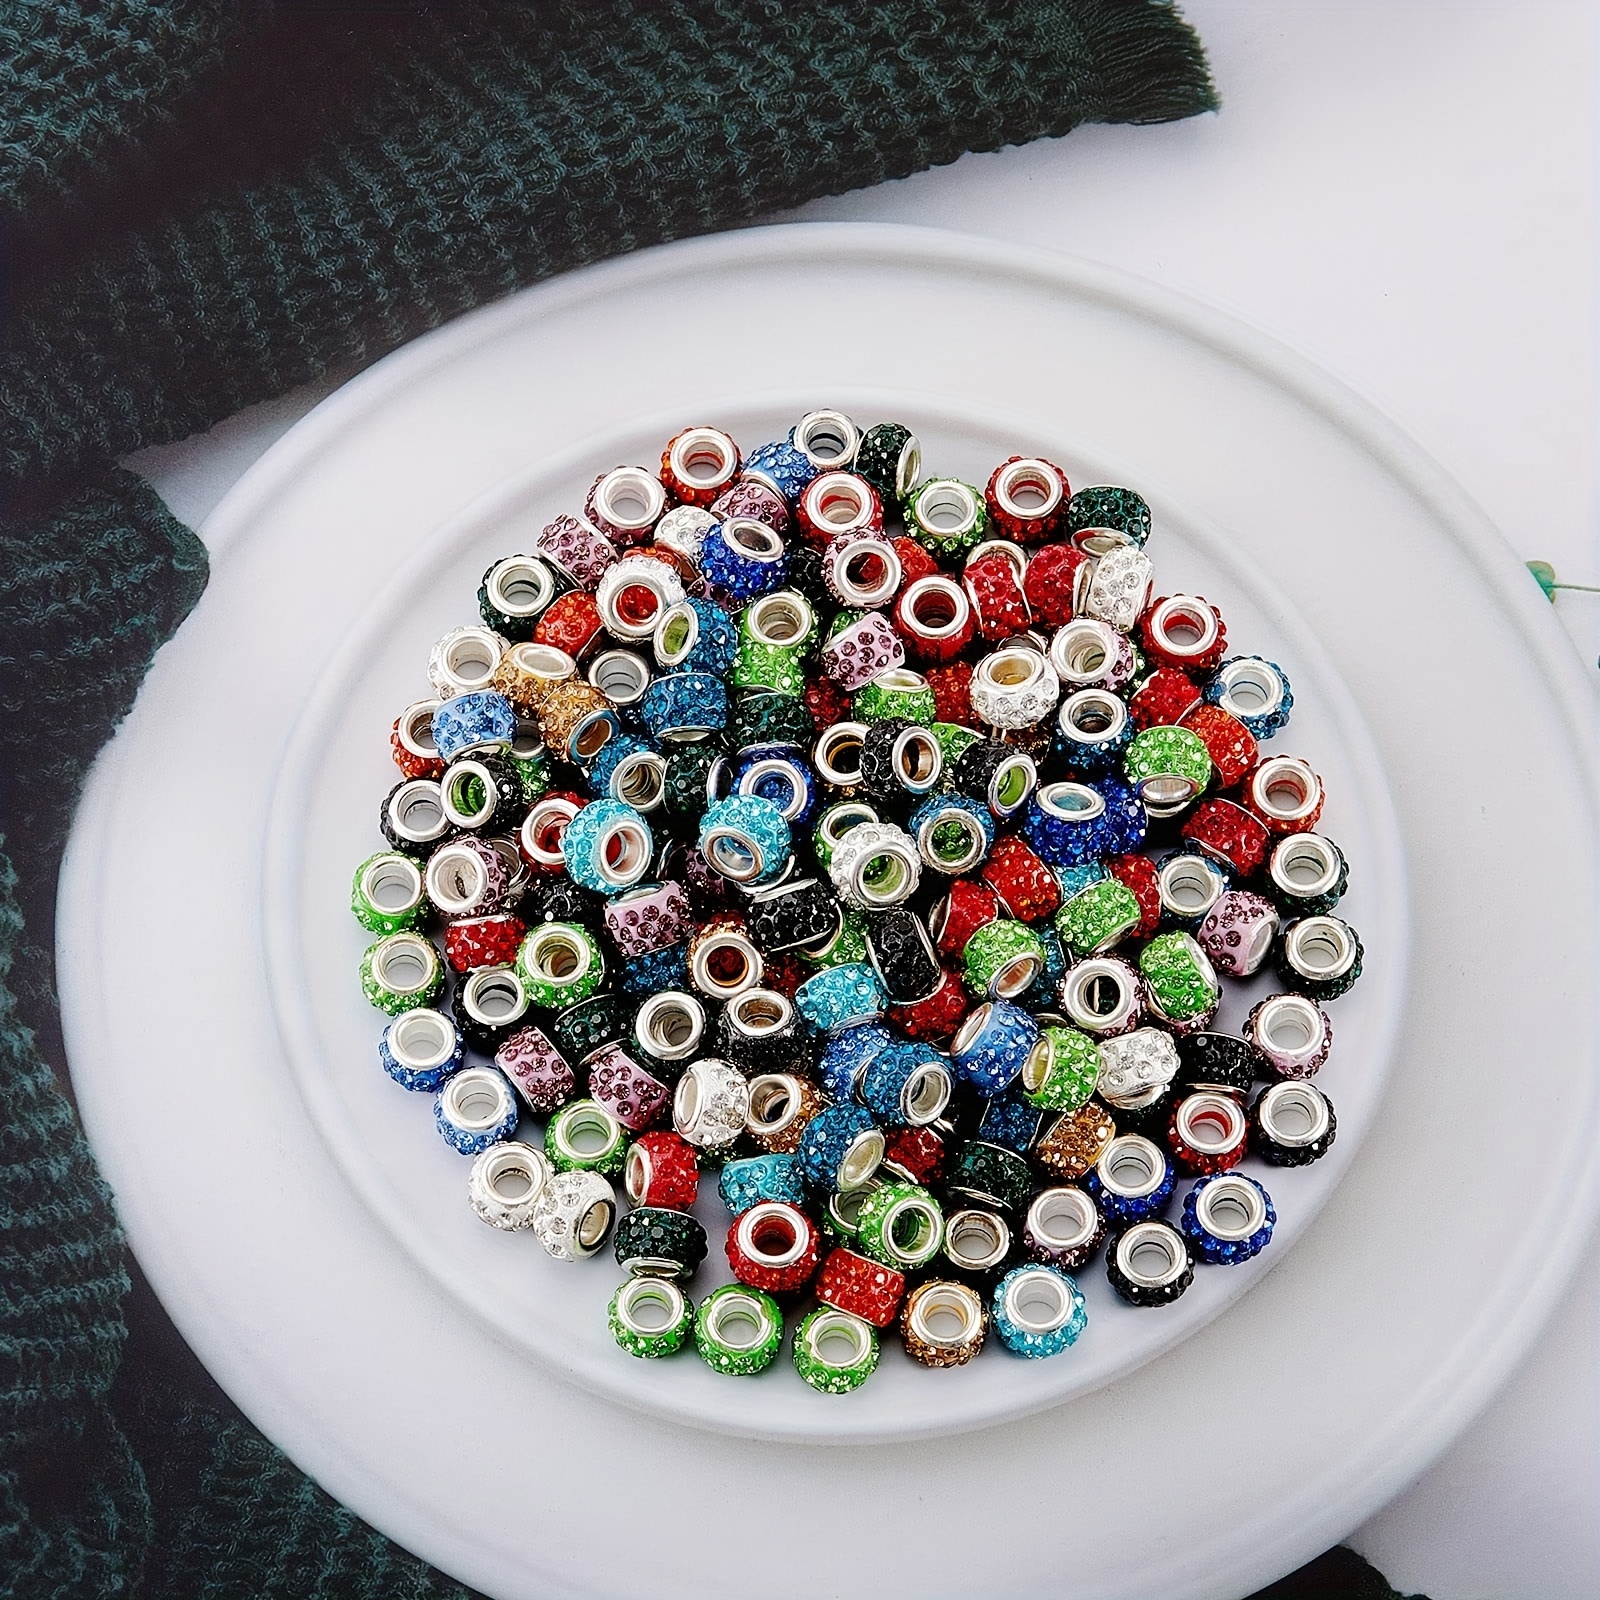  European Large Hole Beads 200Pcs Mixed Color Glass Craft Beads  Assortments Large Hole Spacer Beads Rhinestone Craft Beads for DIY Charms  Bracelet Jewelry Making